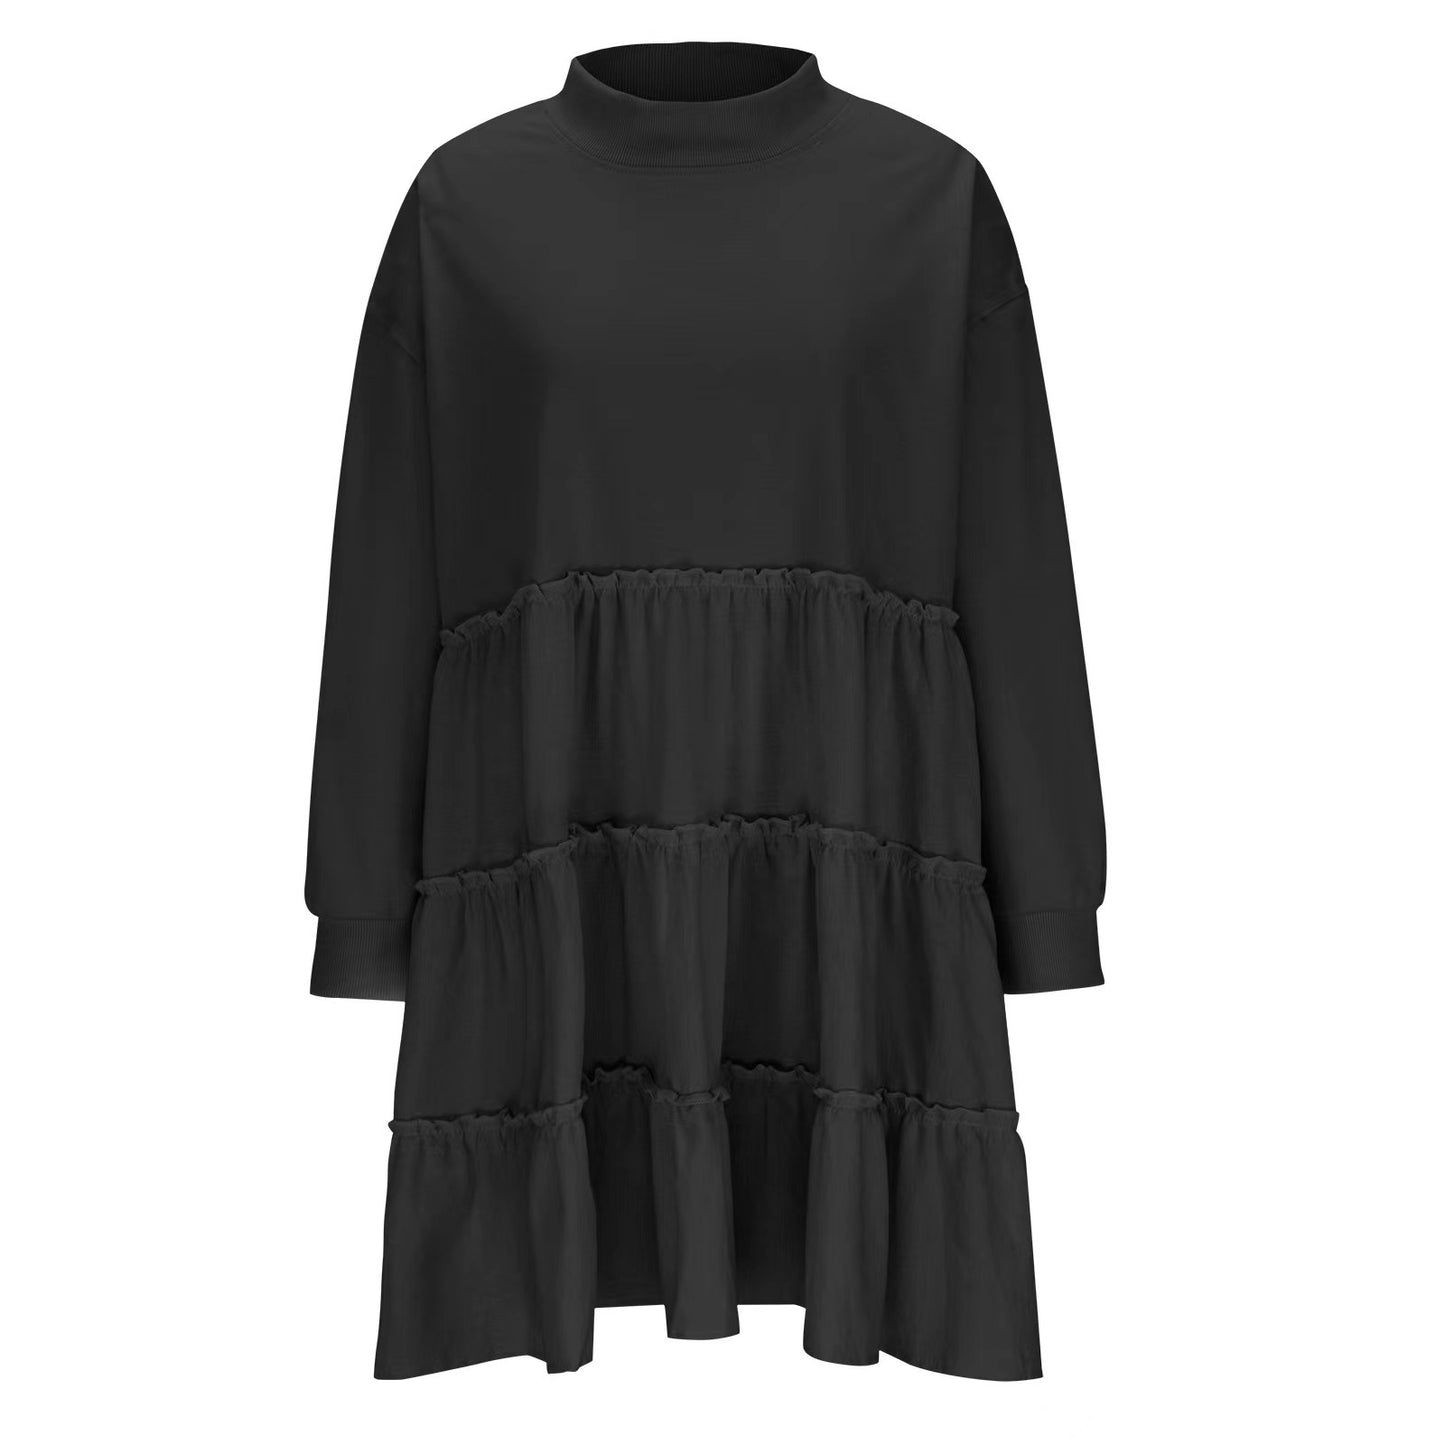 Loose-Fitting Pleated Sweater Dress with Stitching for Women